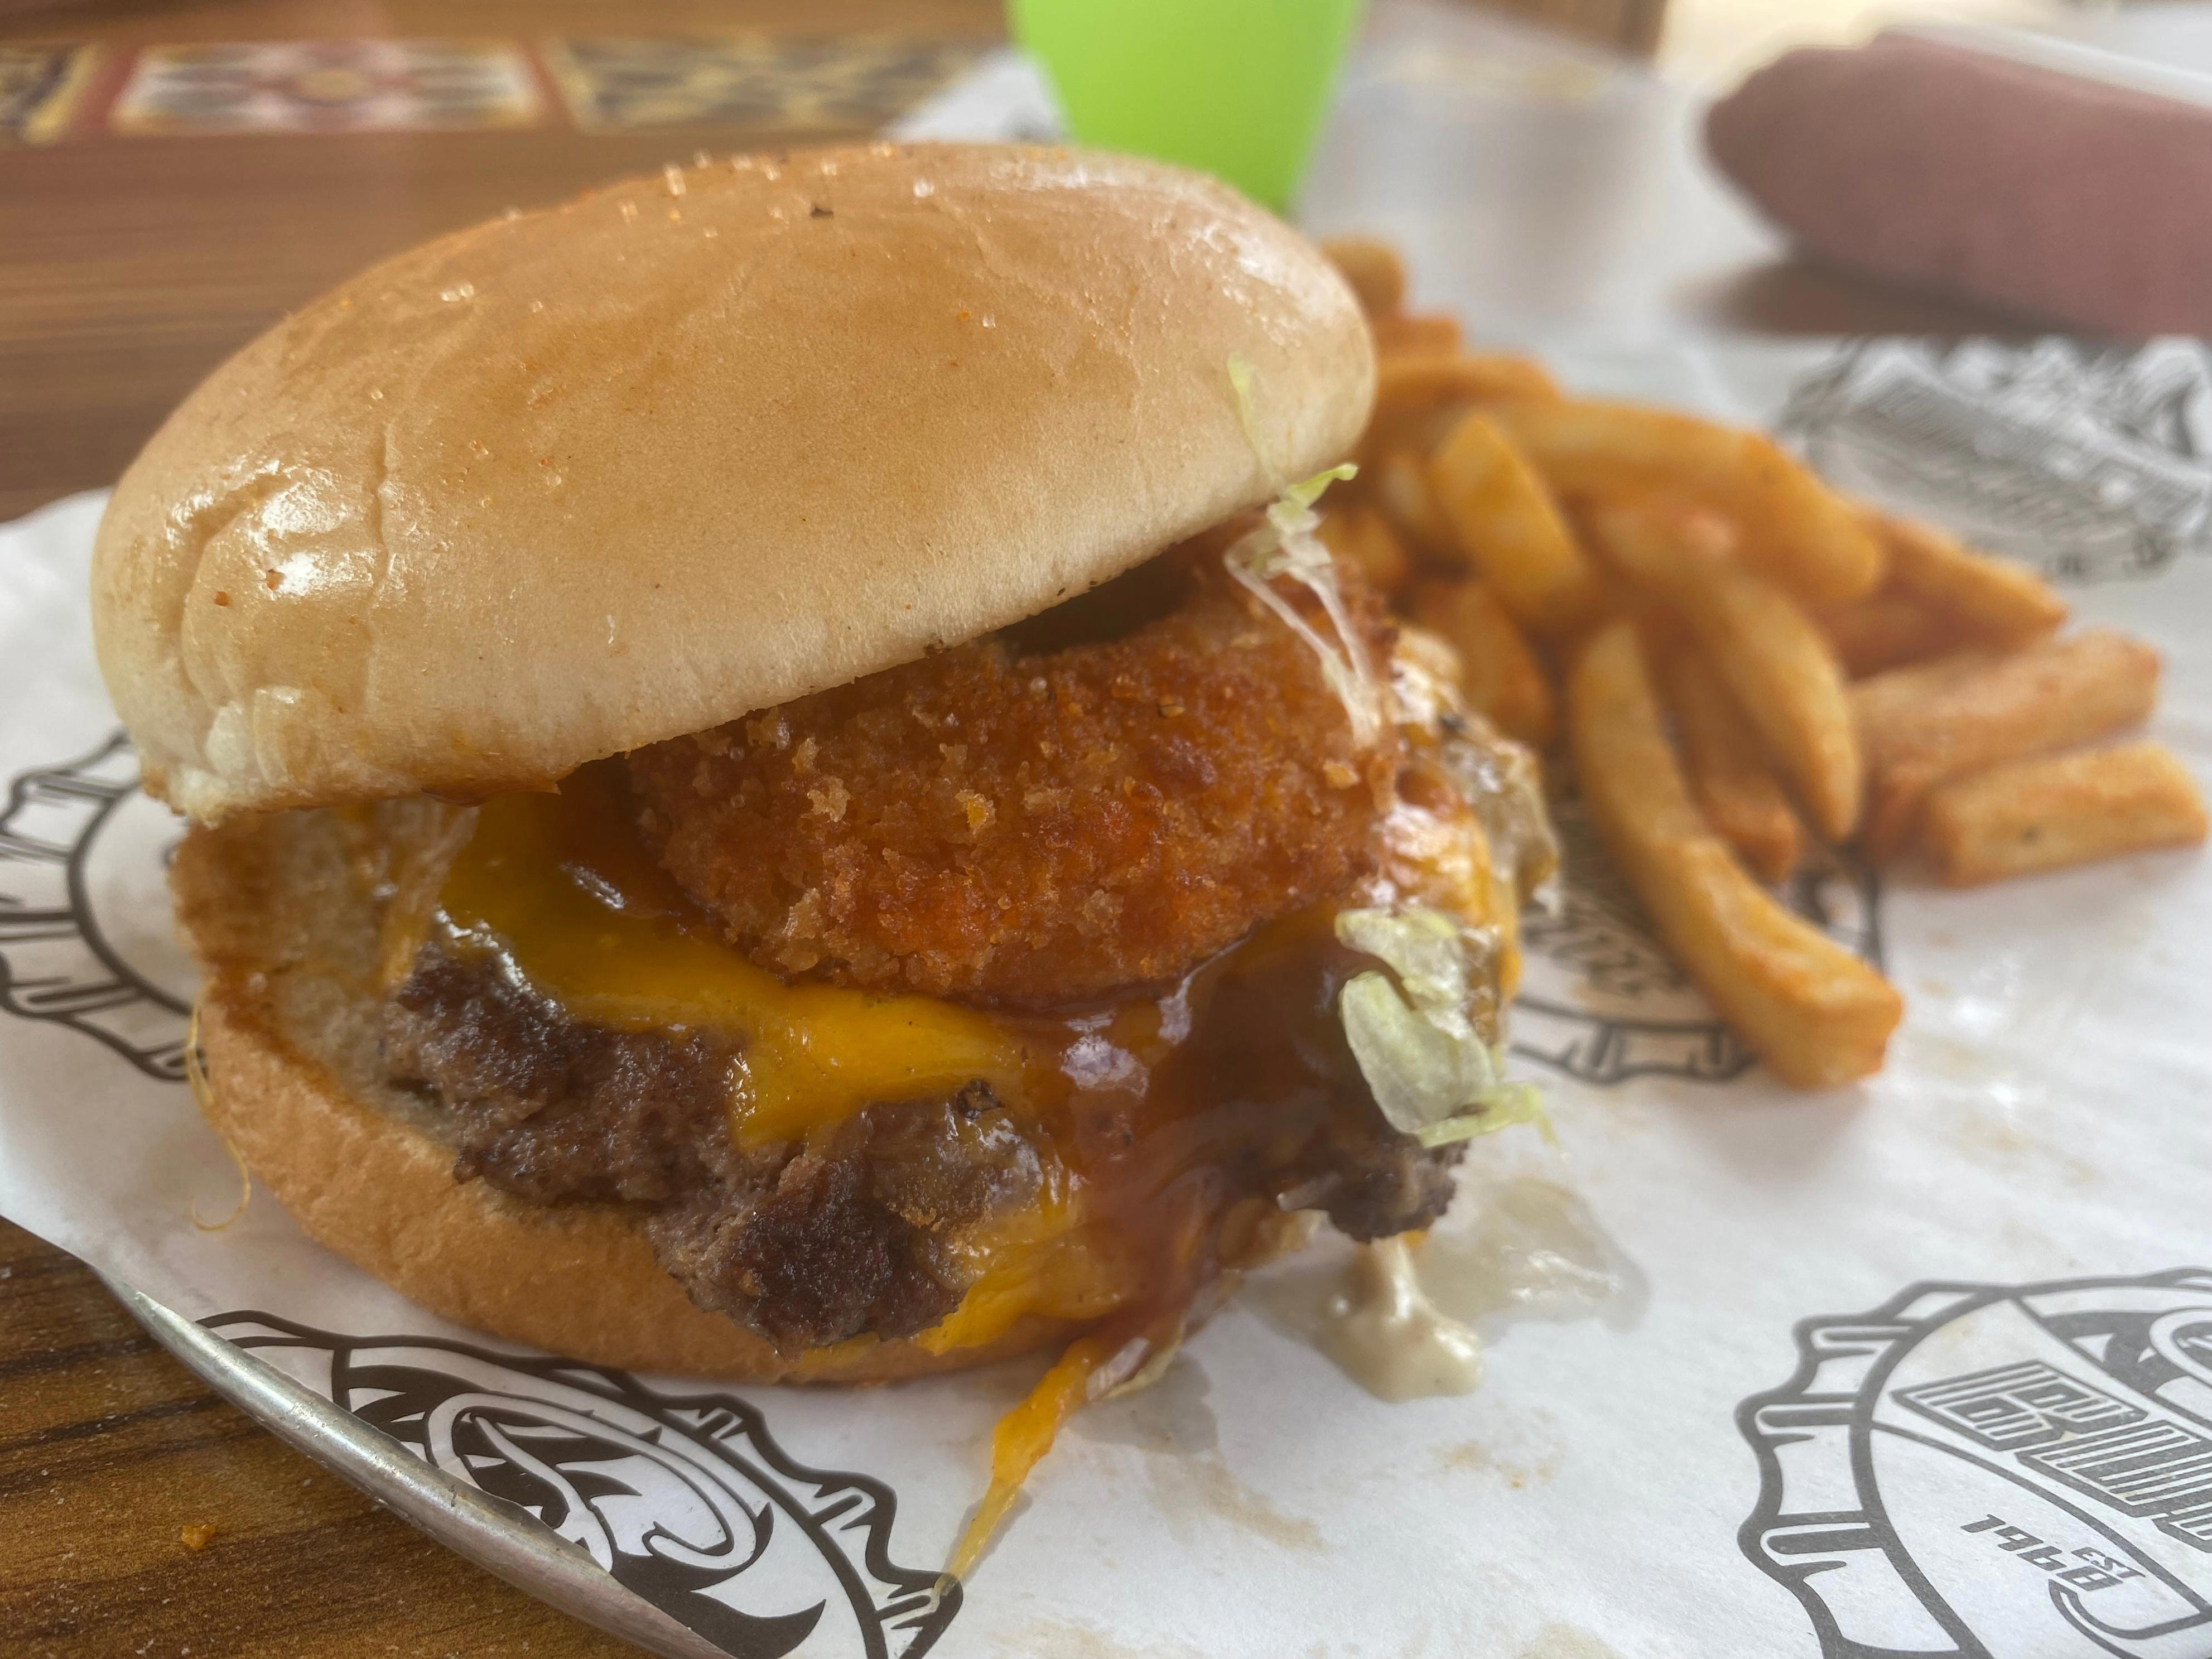 <p>The Ringer was dressed up with cheese, a crispy fried onion ring, and Fieri's bourbon-and-brown-sugar barbecue sauce, which was a bit spicy.</p><p>All of the sauces made the burger a little messy, but it was nothing a napkin couldn't fix.</p><p>The one bad thing about the Ringer was that the onion ring got soggy fairly quickly. Next time I order it, I'll ask for a few onion rings on the side and eat them along with the burger.</p>